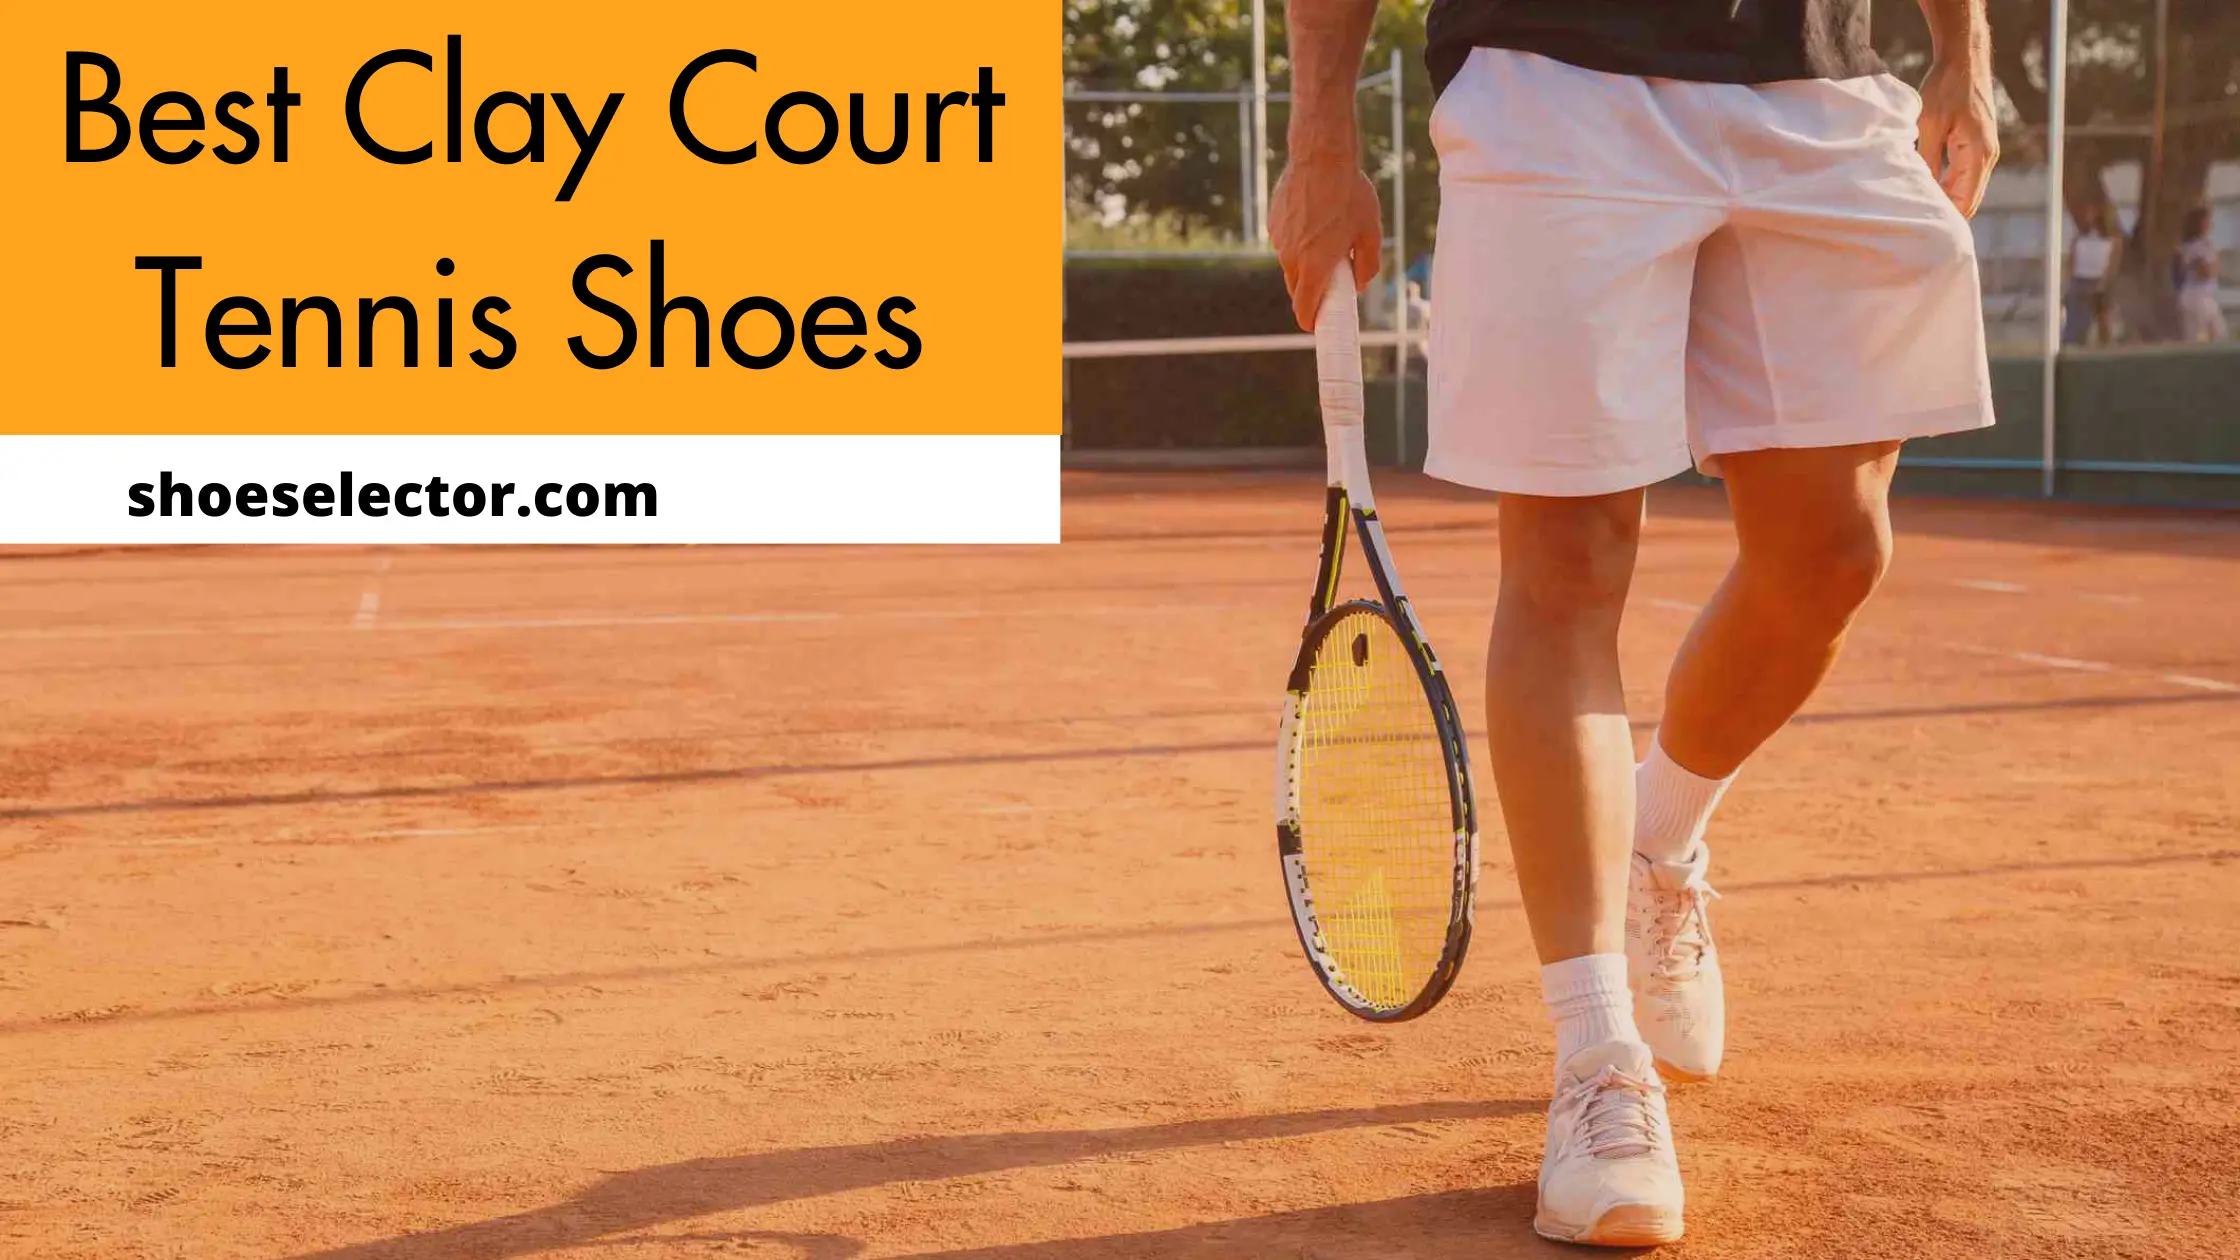 Best Clay Court Tennis Shoes With Product Comparison